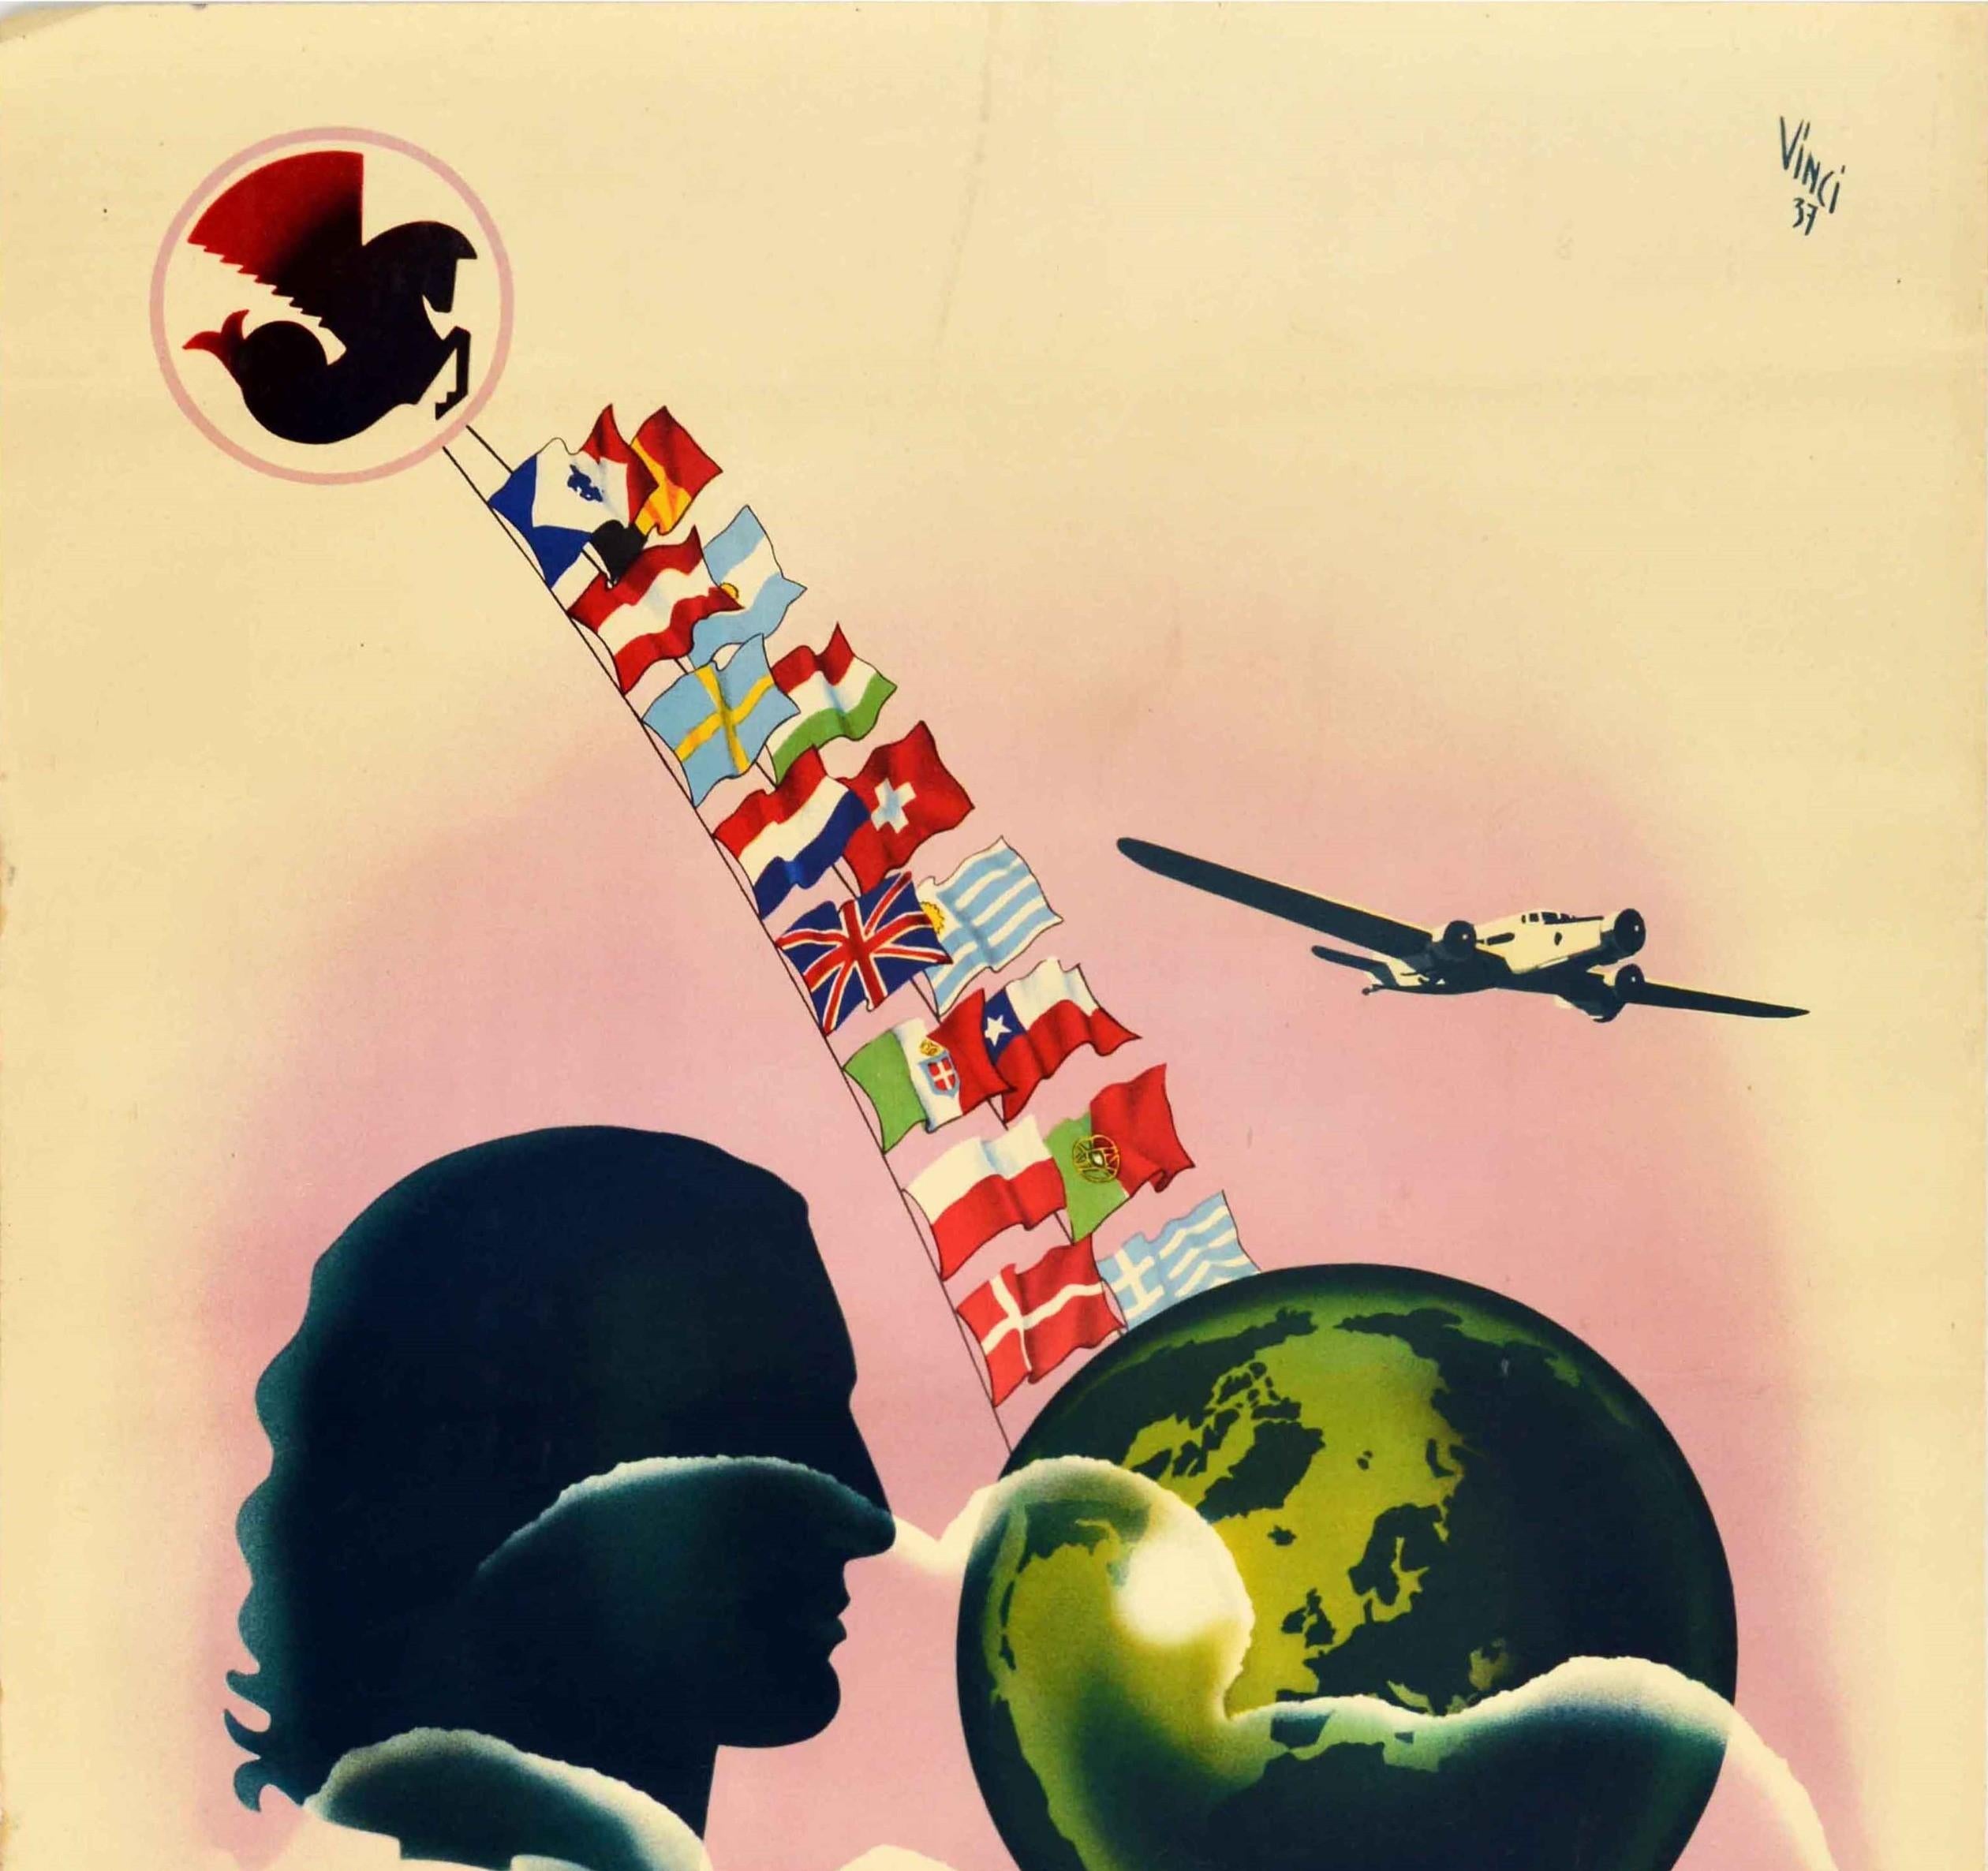 Original Vintage Poster Air France Passengers Mail Freight Worldwide Flags Globe - Print by Vinci